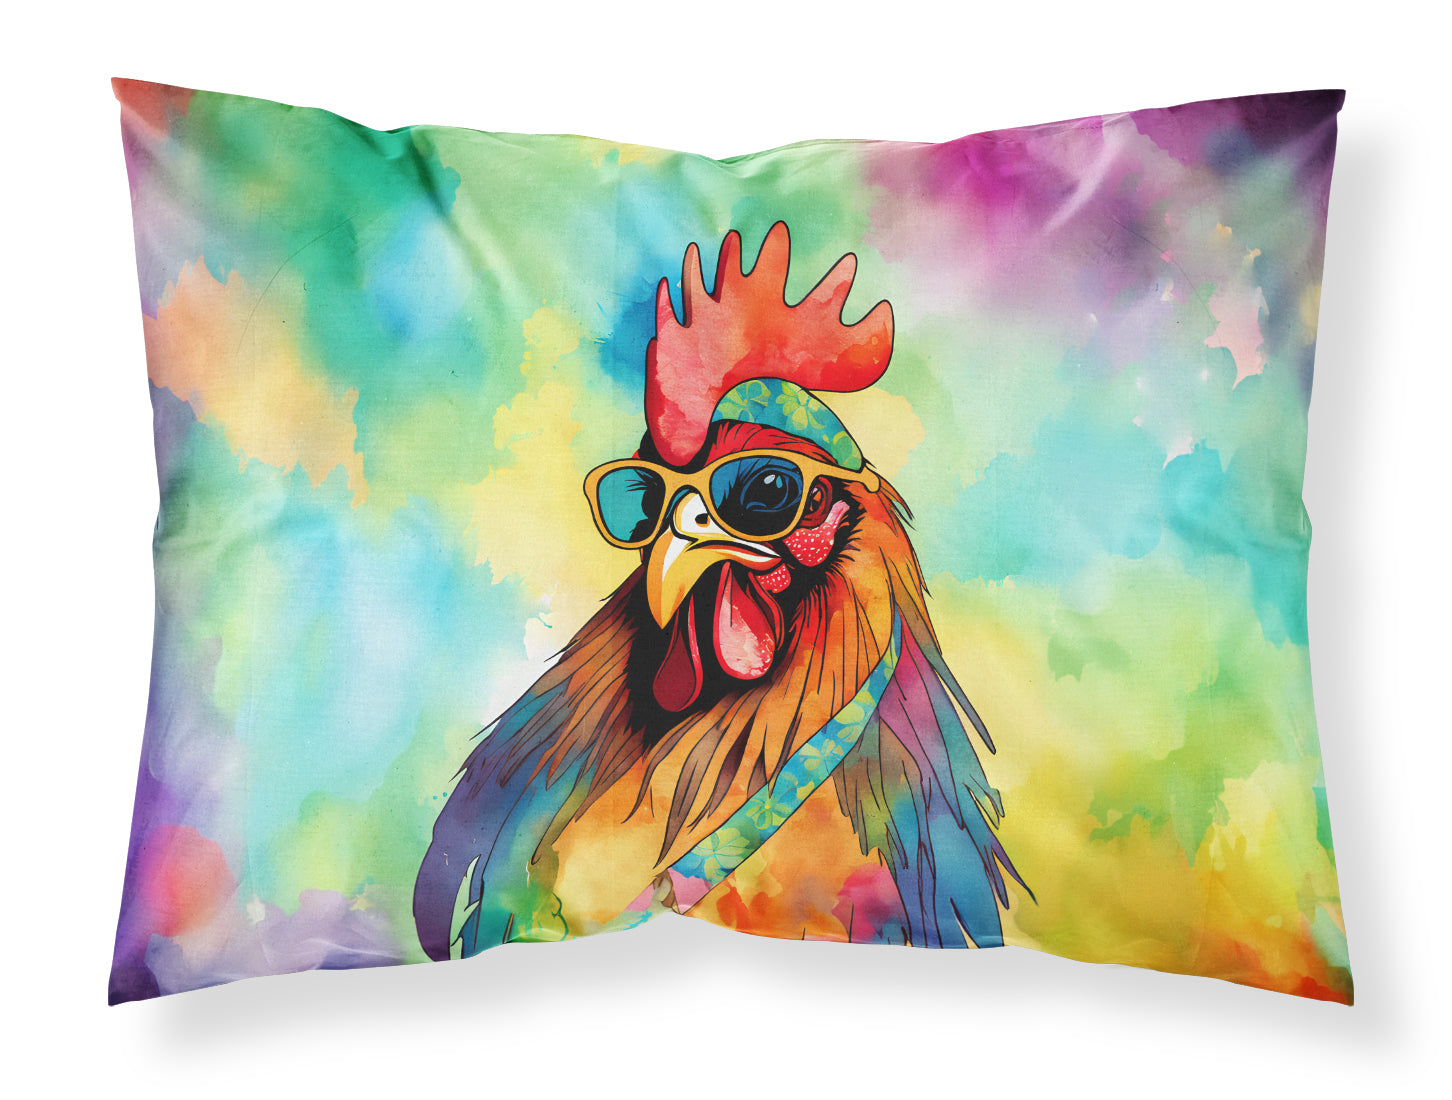 Buy this Hippie Animal Rooster Standard Pillowcase